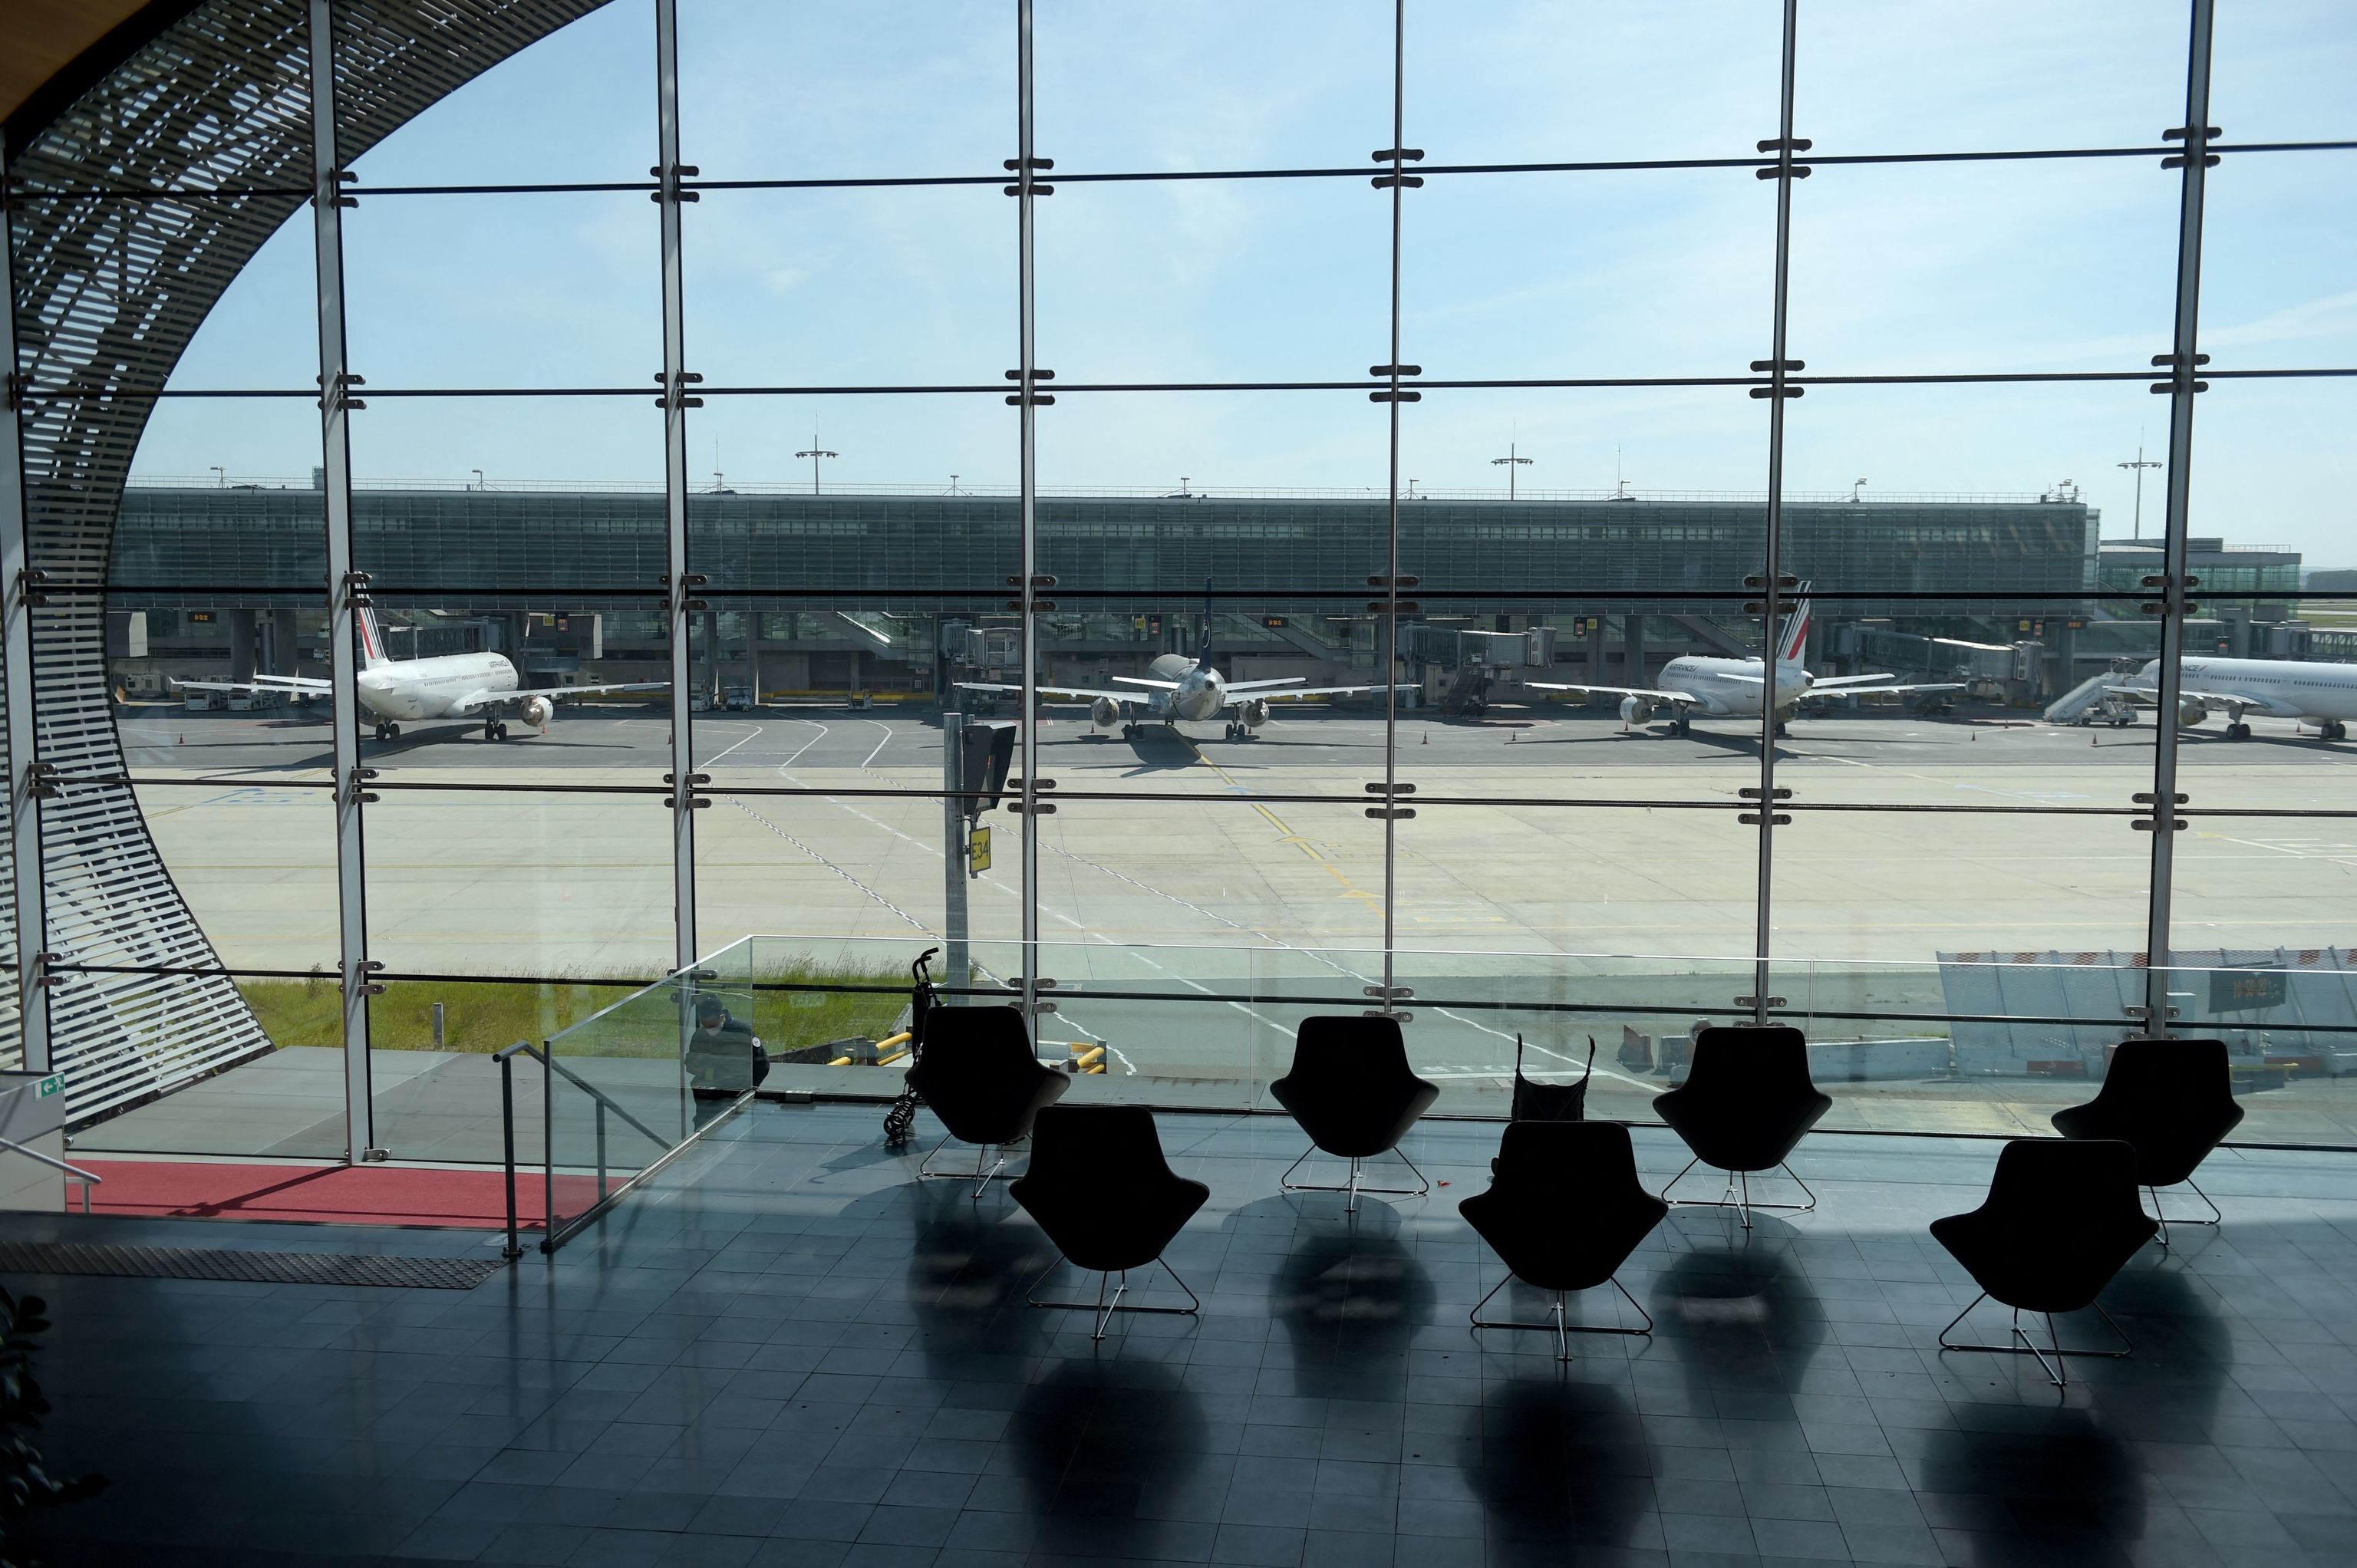 image of Charles de Gaulle airport